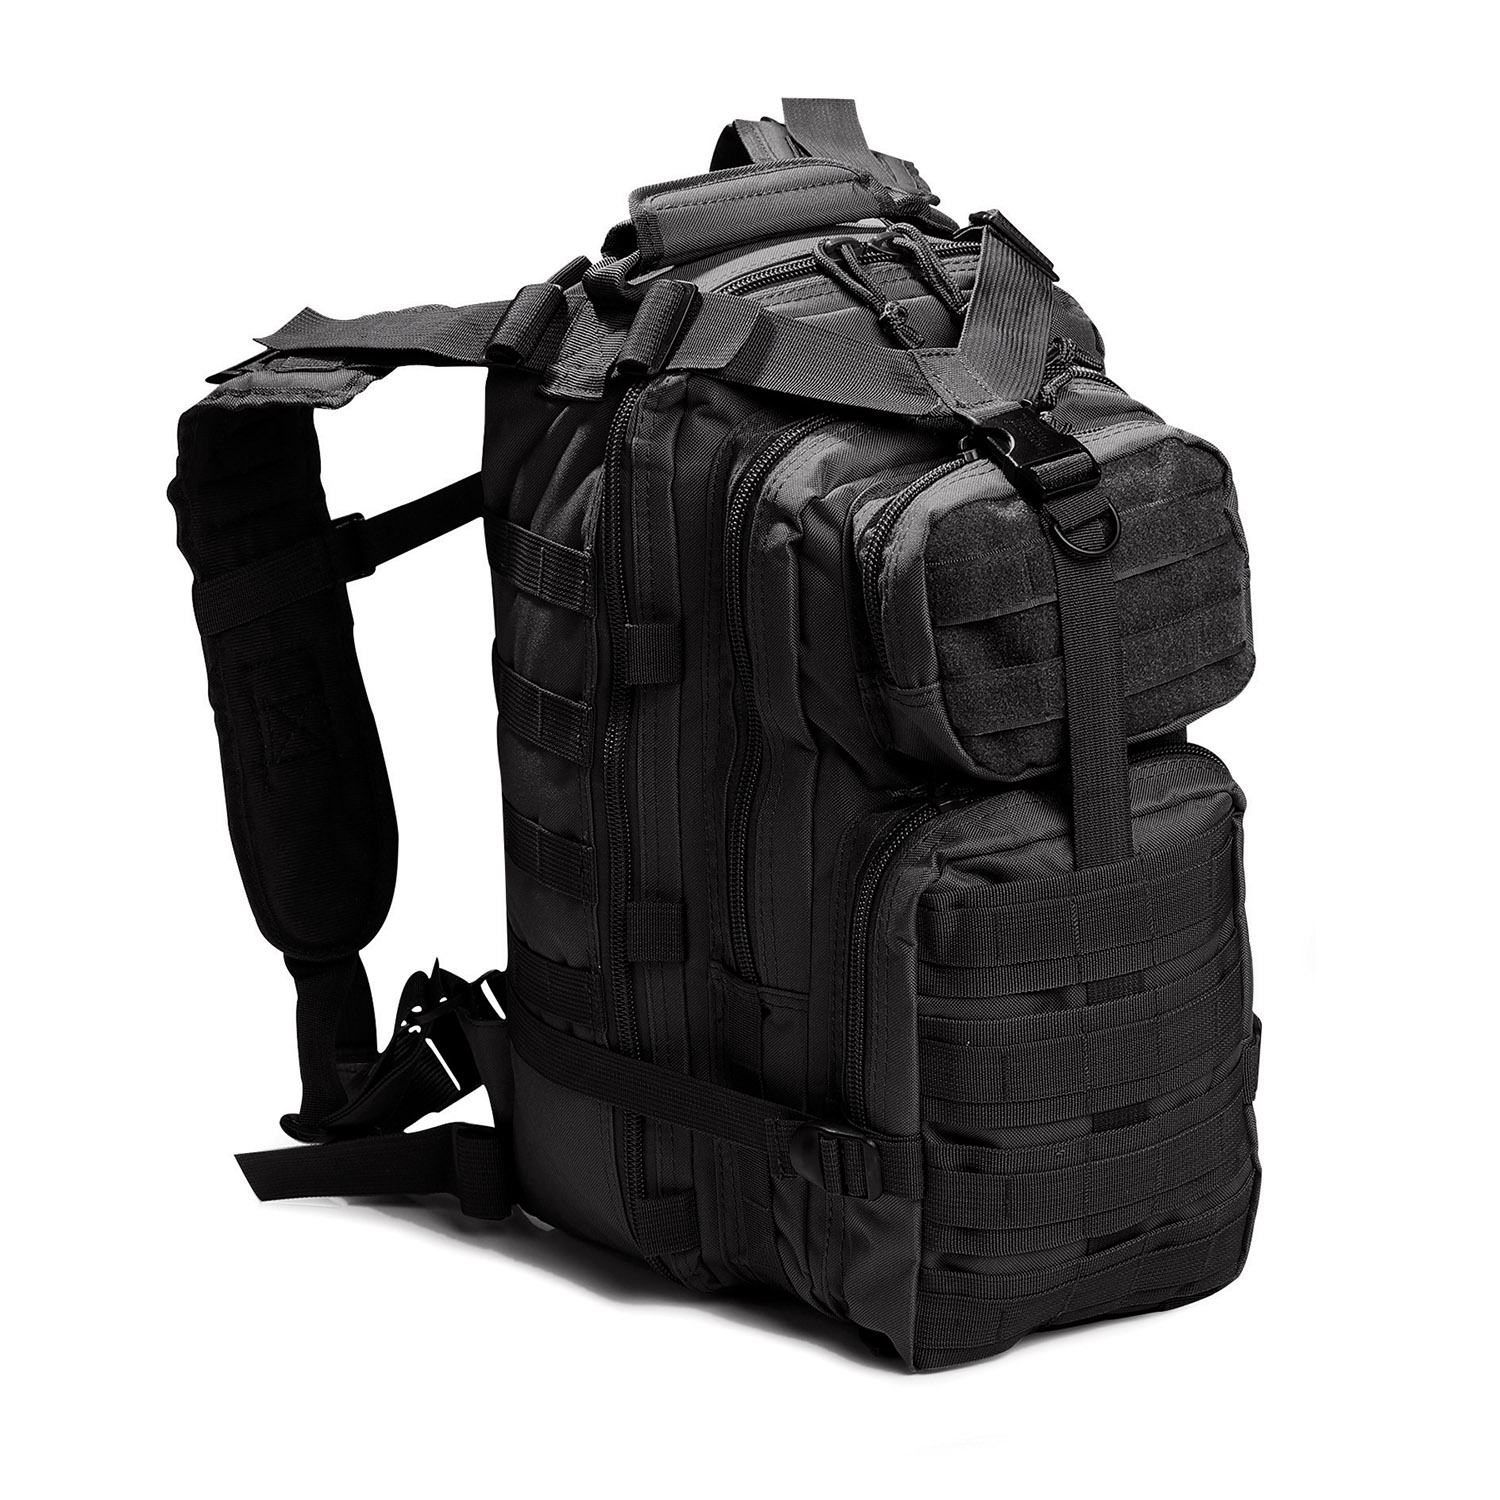 Black Expandable Backpack By Propper